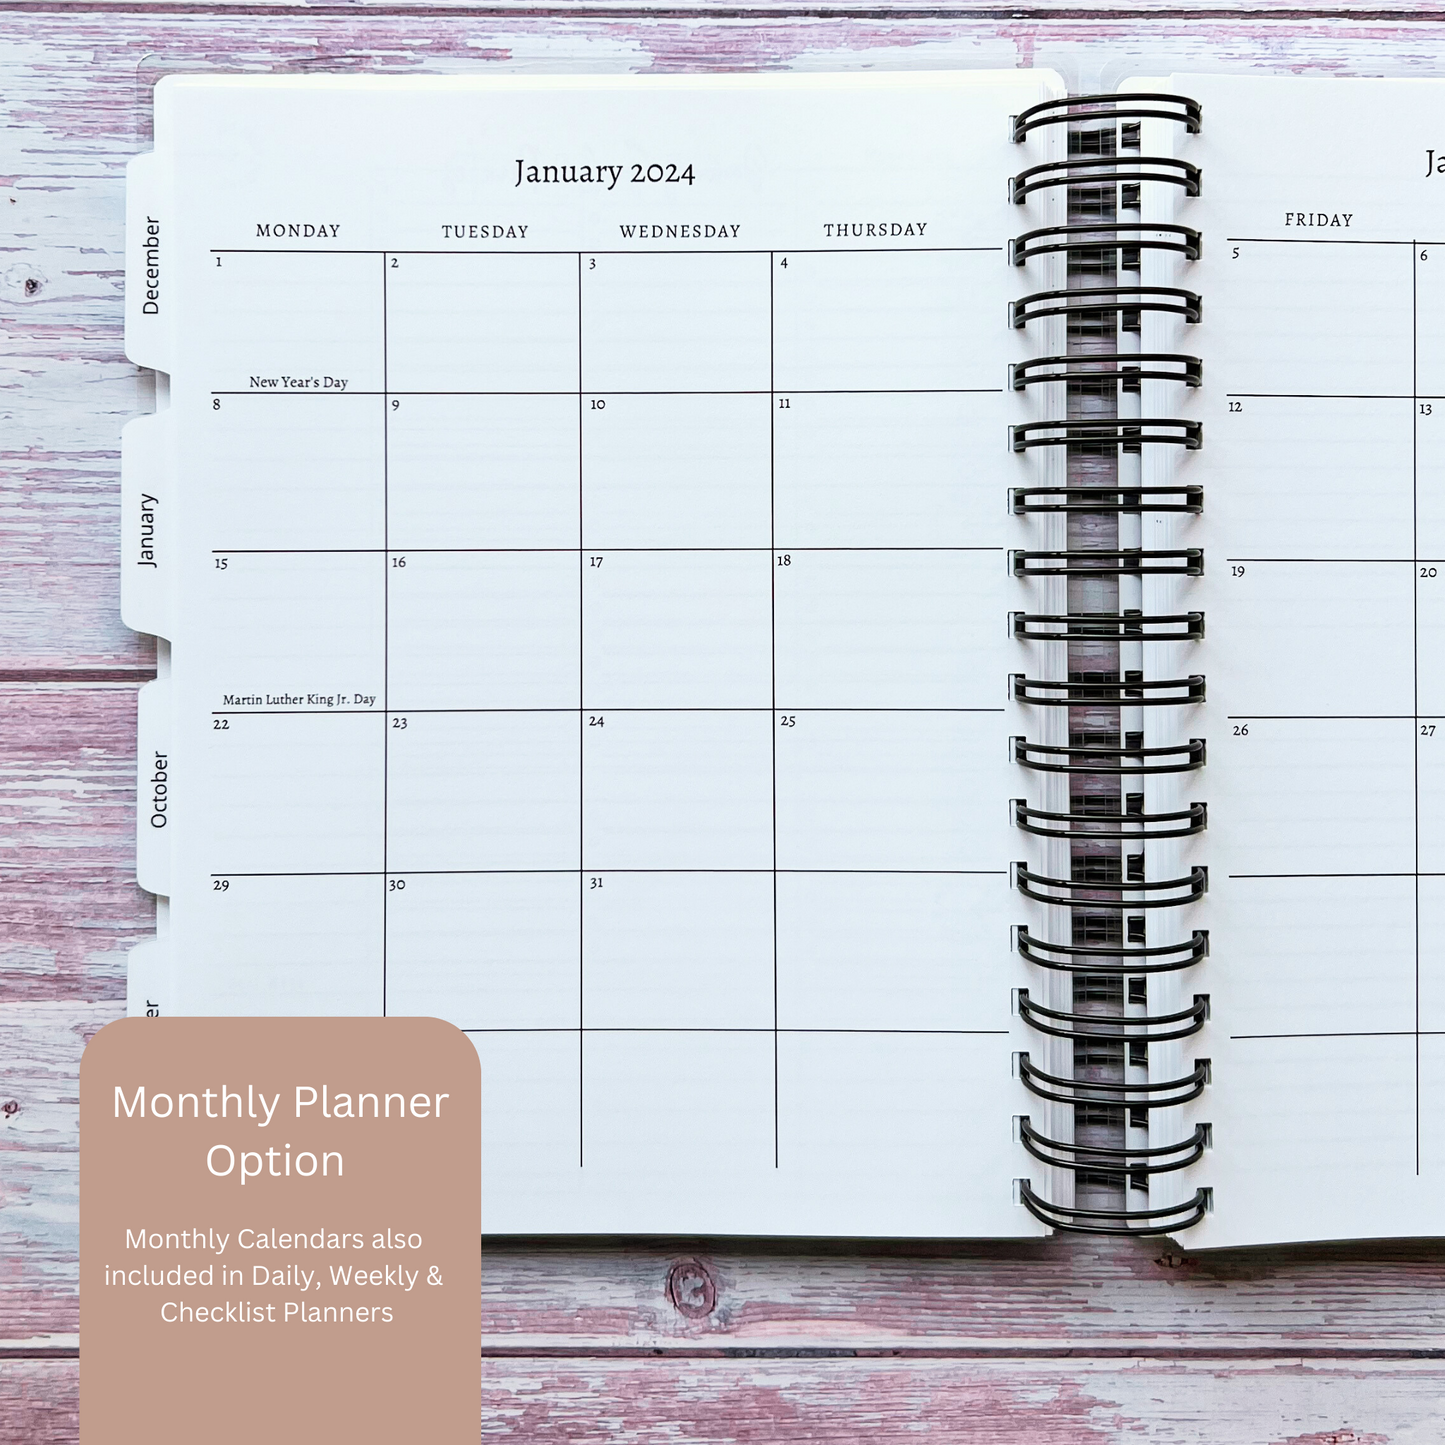 Personalized Monthly Planner - Magical Fairy Castle